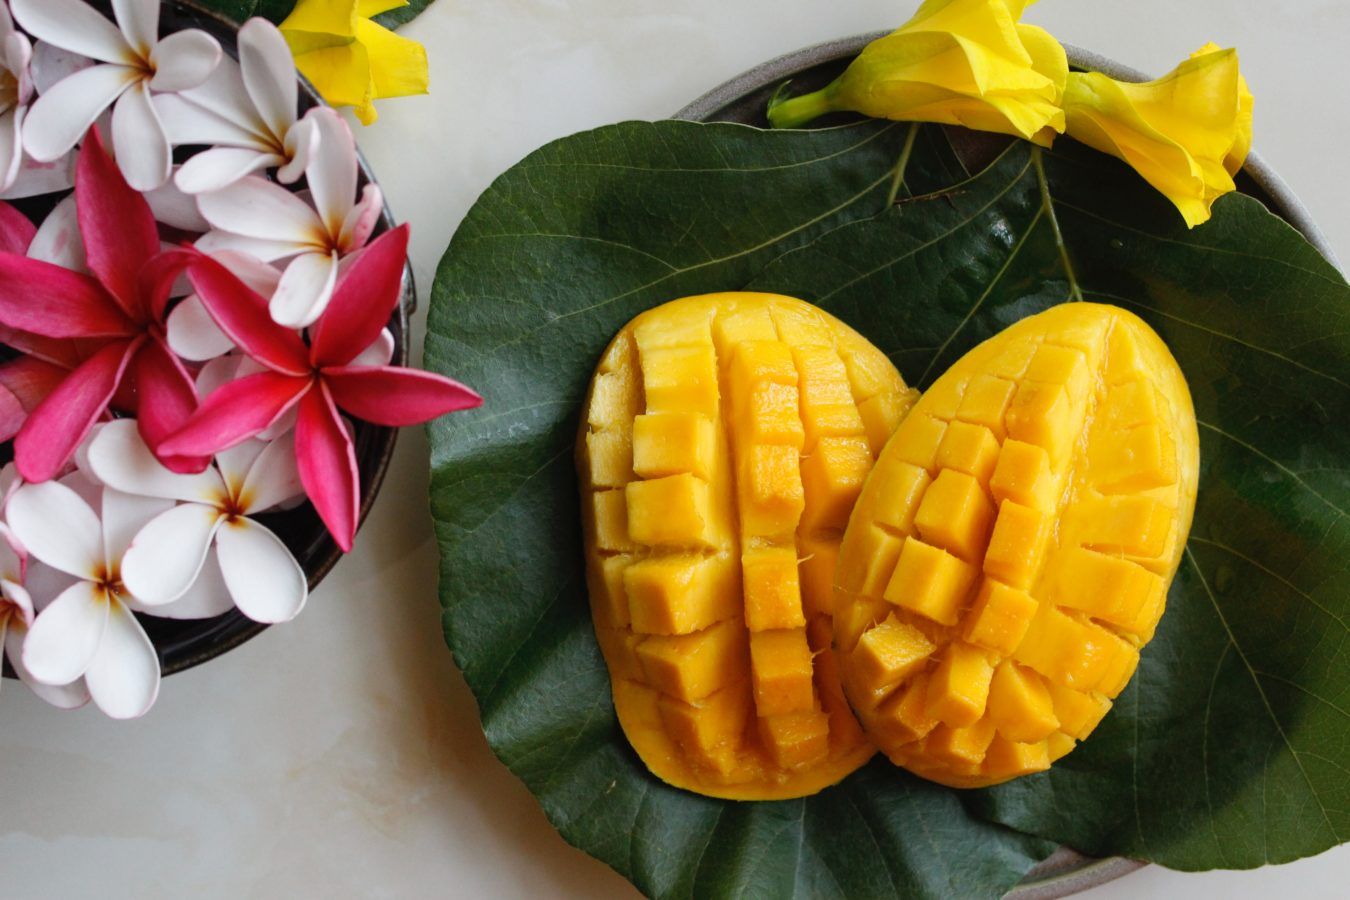 Pack seasonal goodness with these 10 mango-based beauty products